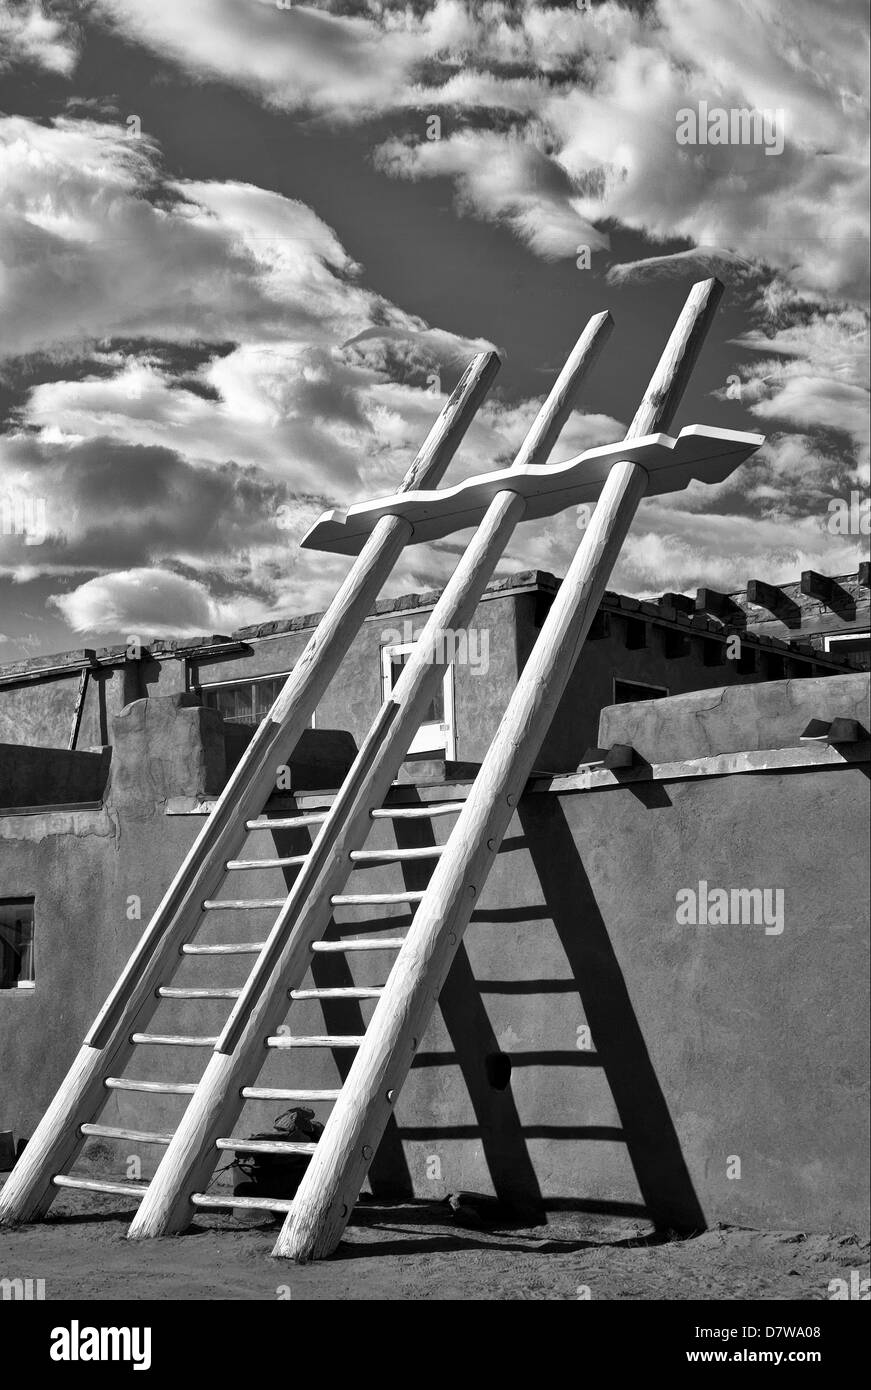 Kkiva ladder at Acoma Pueblo New Mexico, B&W in the style of Ansel Adams and W.H.Jackson. Stock Photo